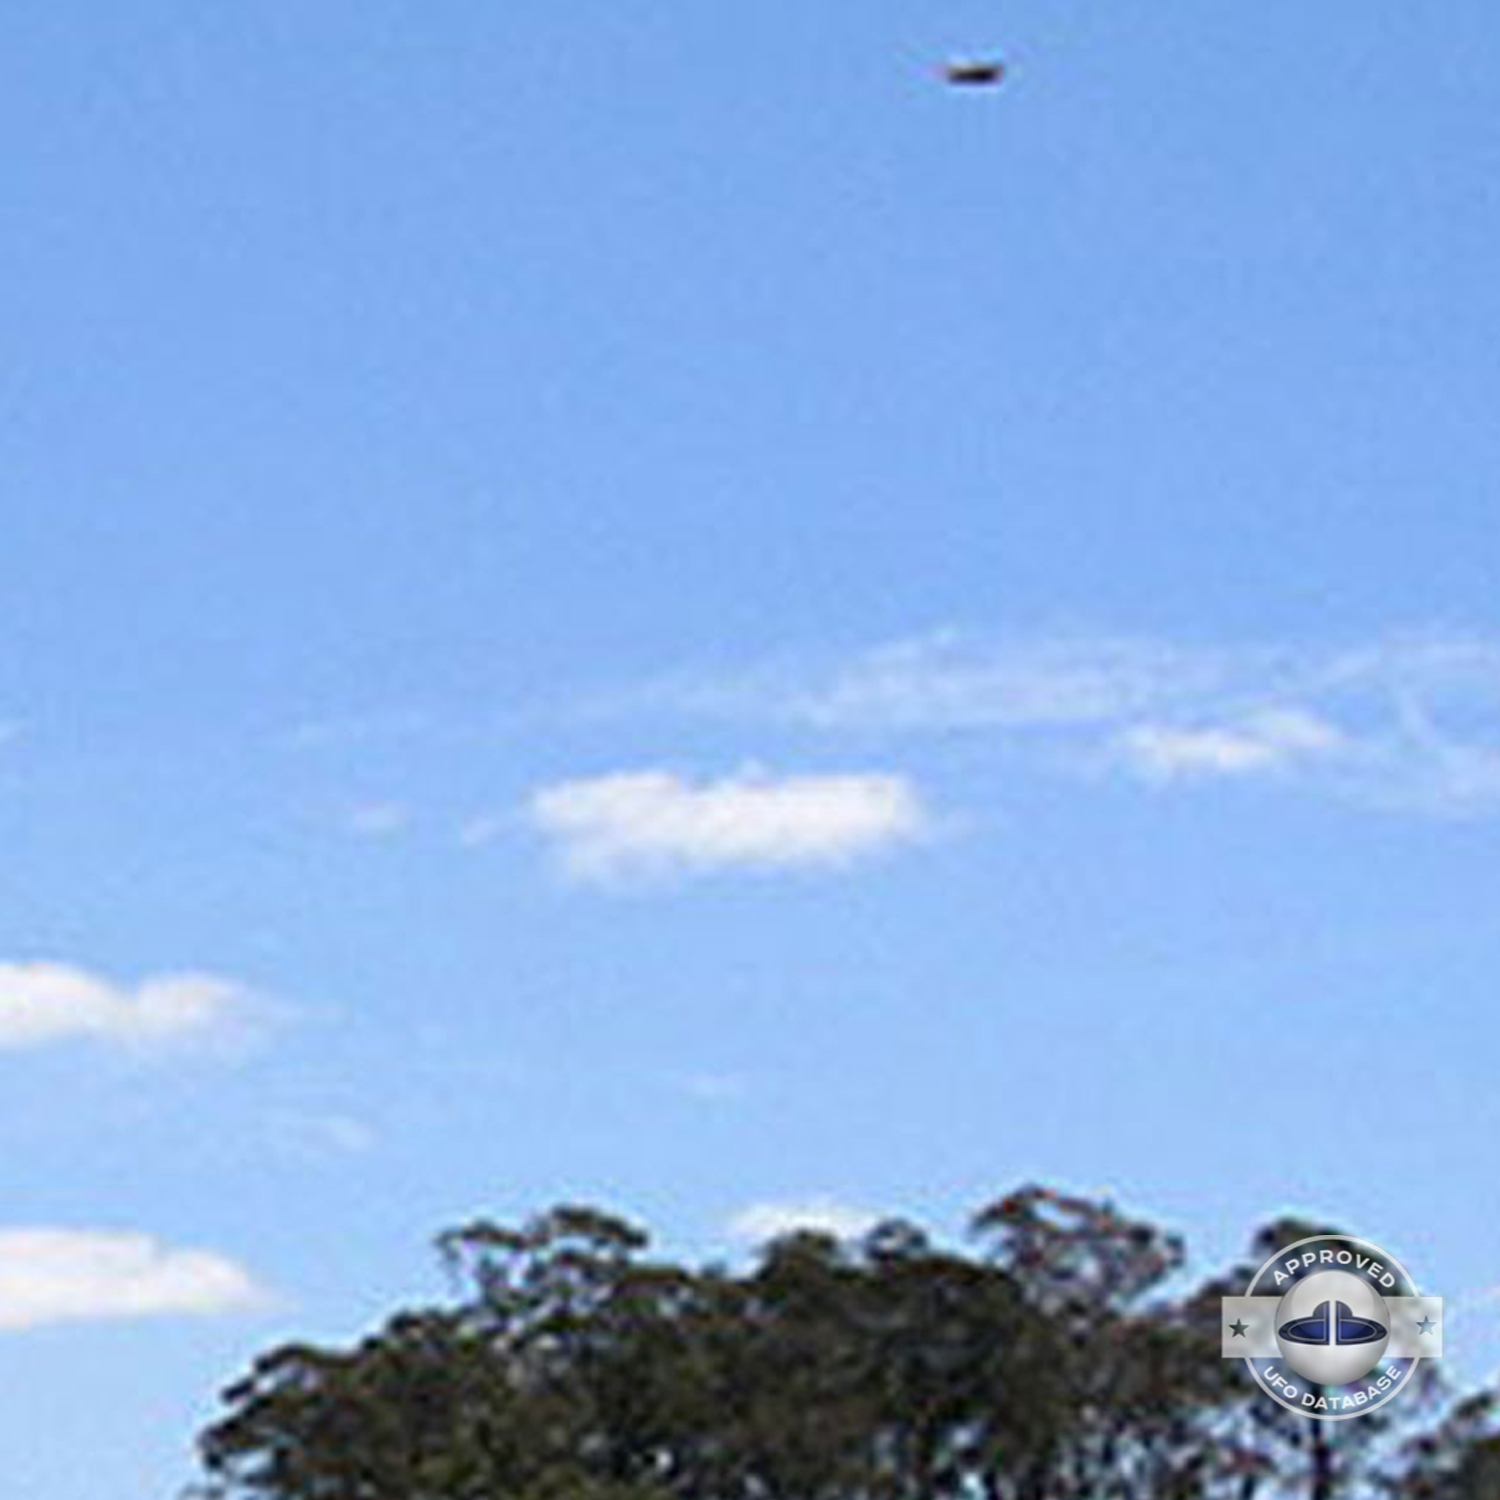 UFO picture taken in Tasmania on A10 highway going from south to north UFO Picture #80-3